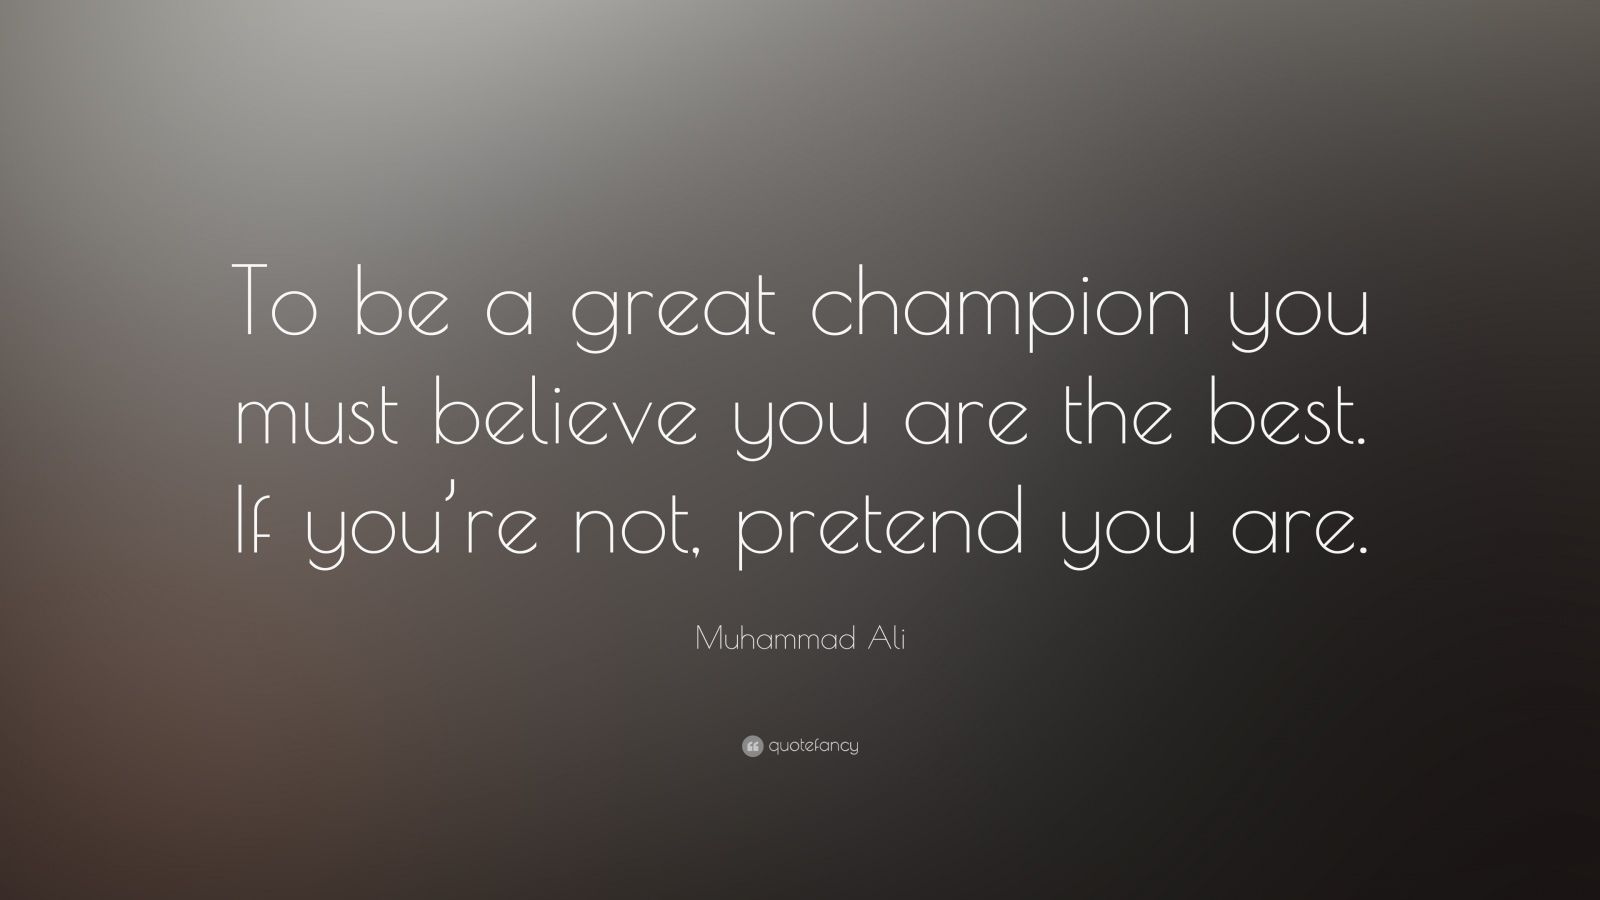 Muhammad Ali Quote: “To be a great champion you must believe you are